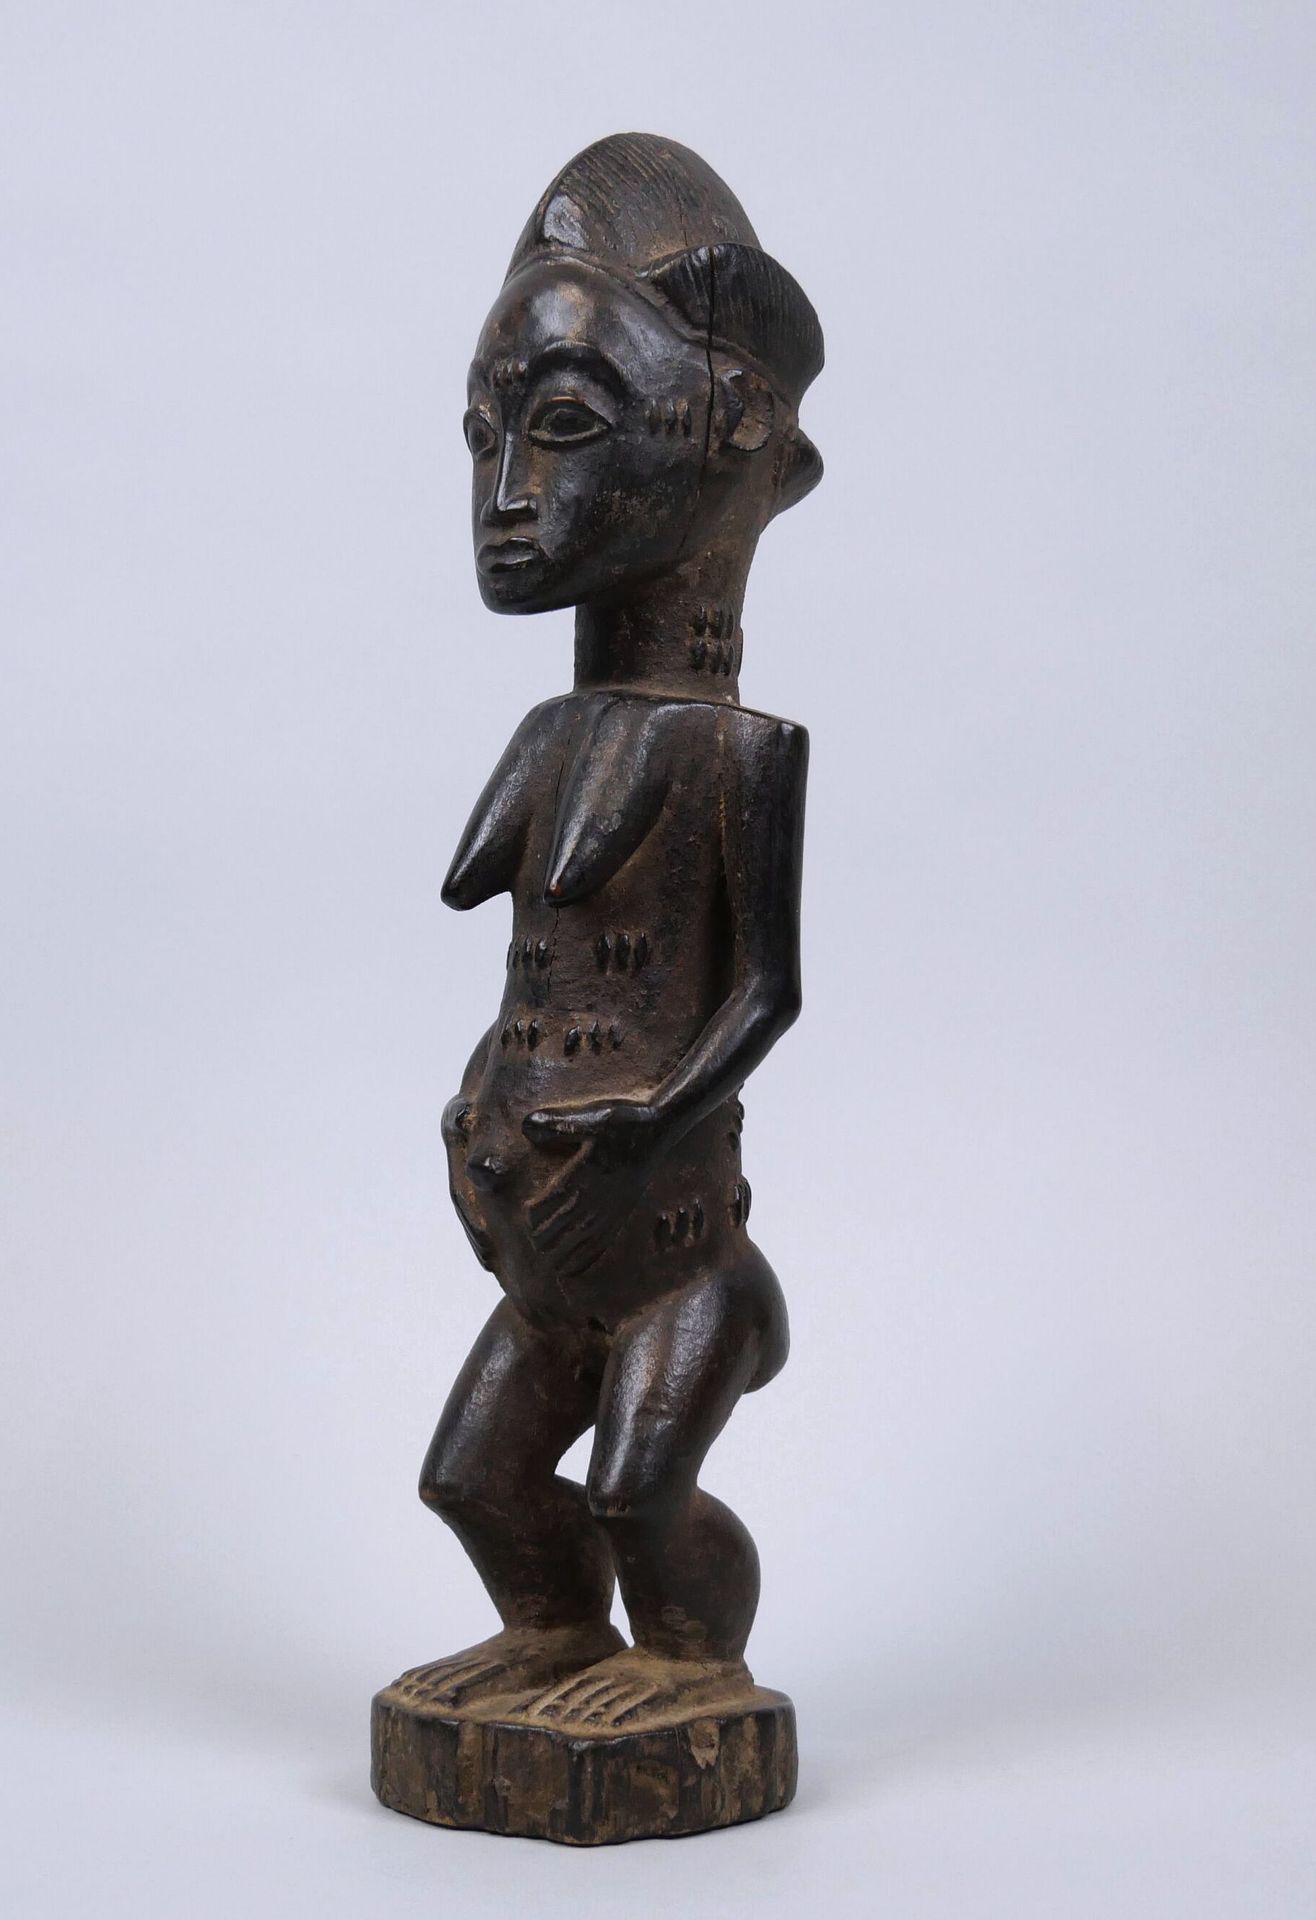 Null IVORY COAST - BAOULE People
Beautiful female statuette from the Beyond, bea&hellip;